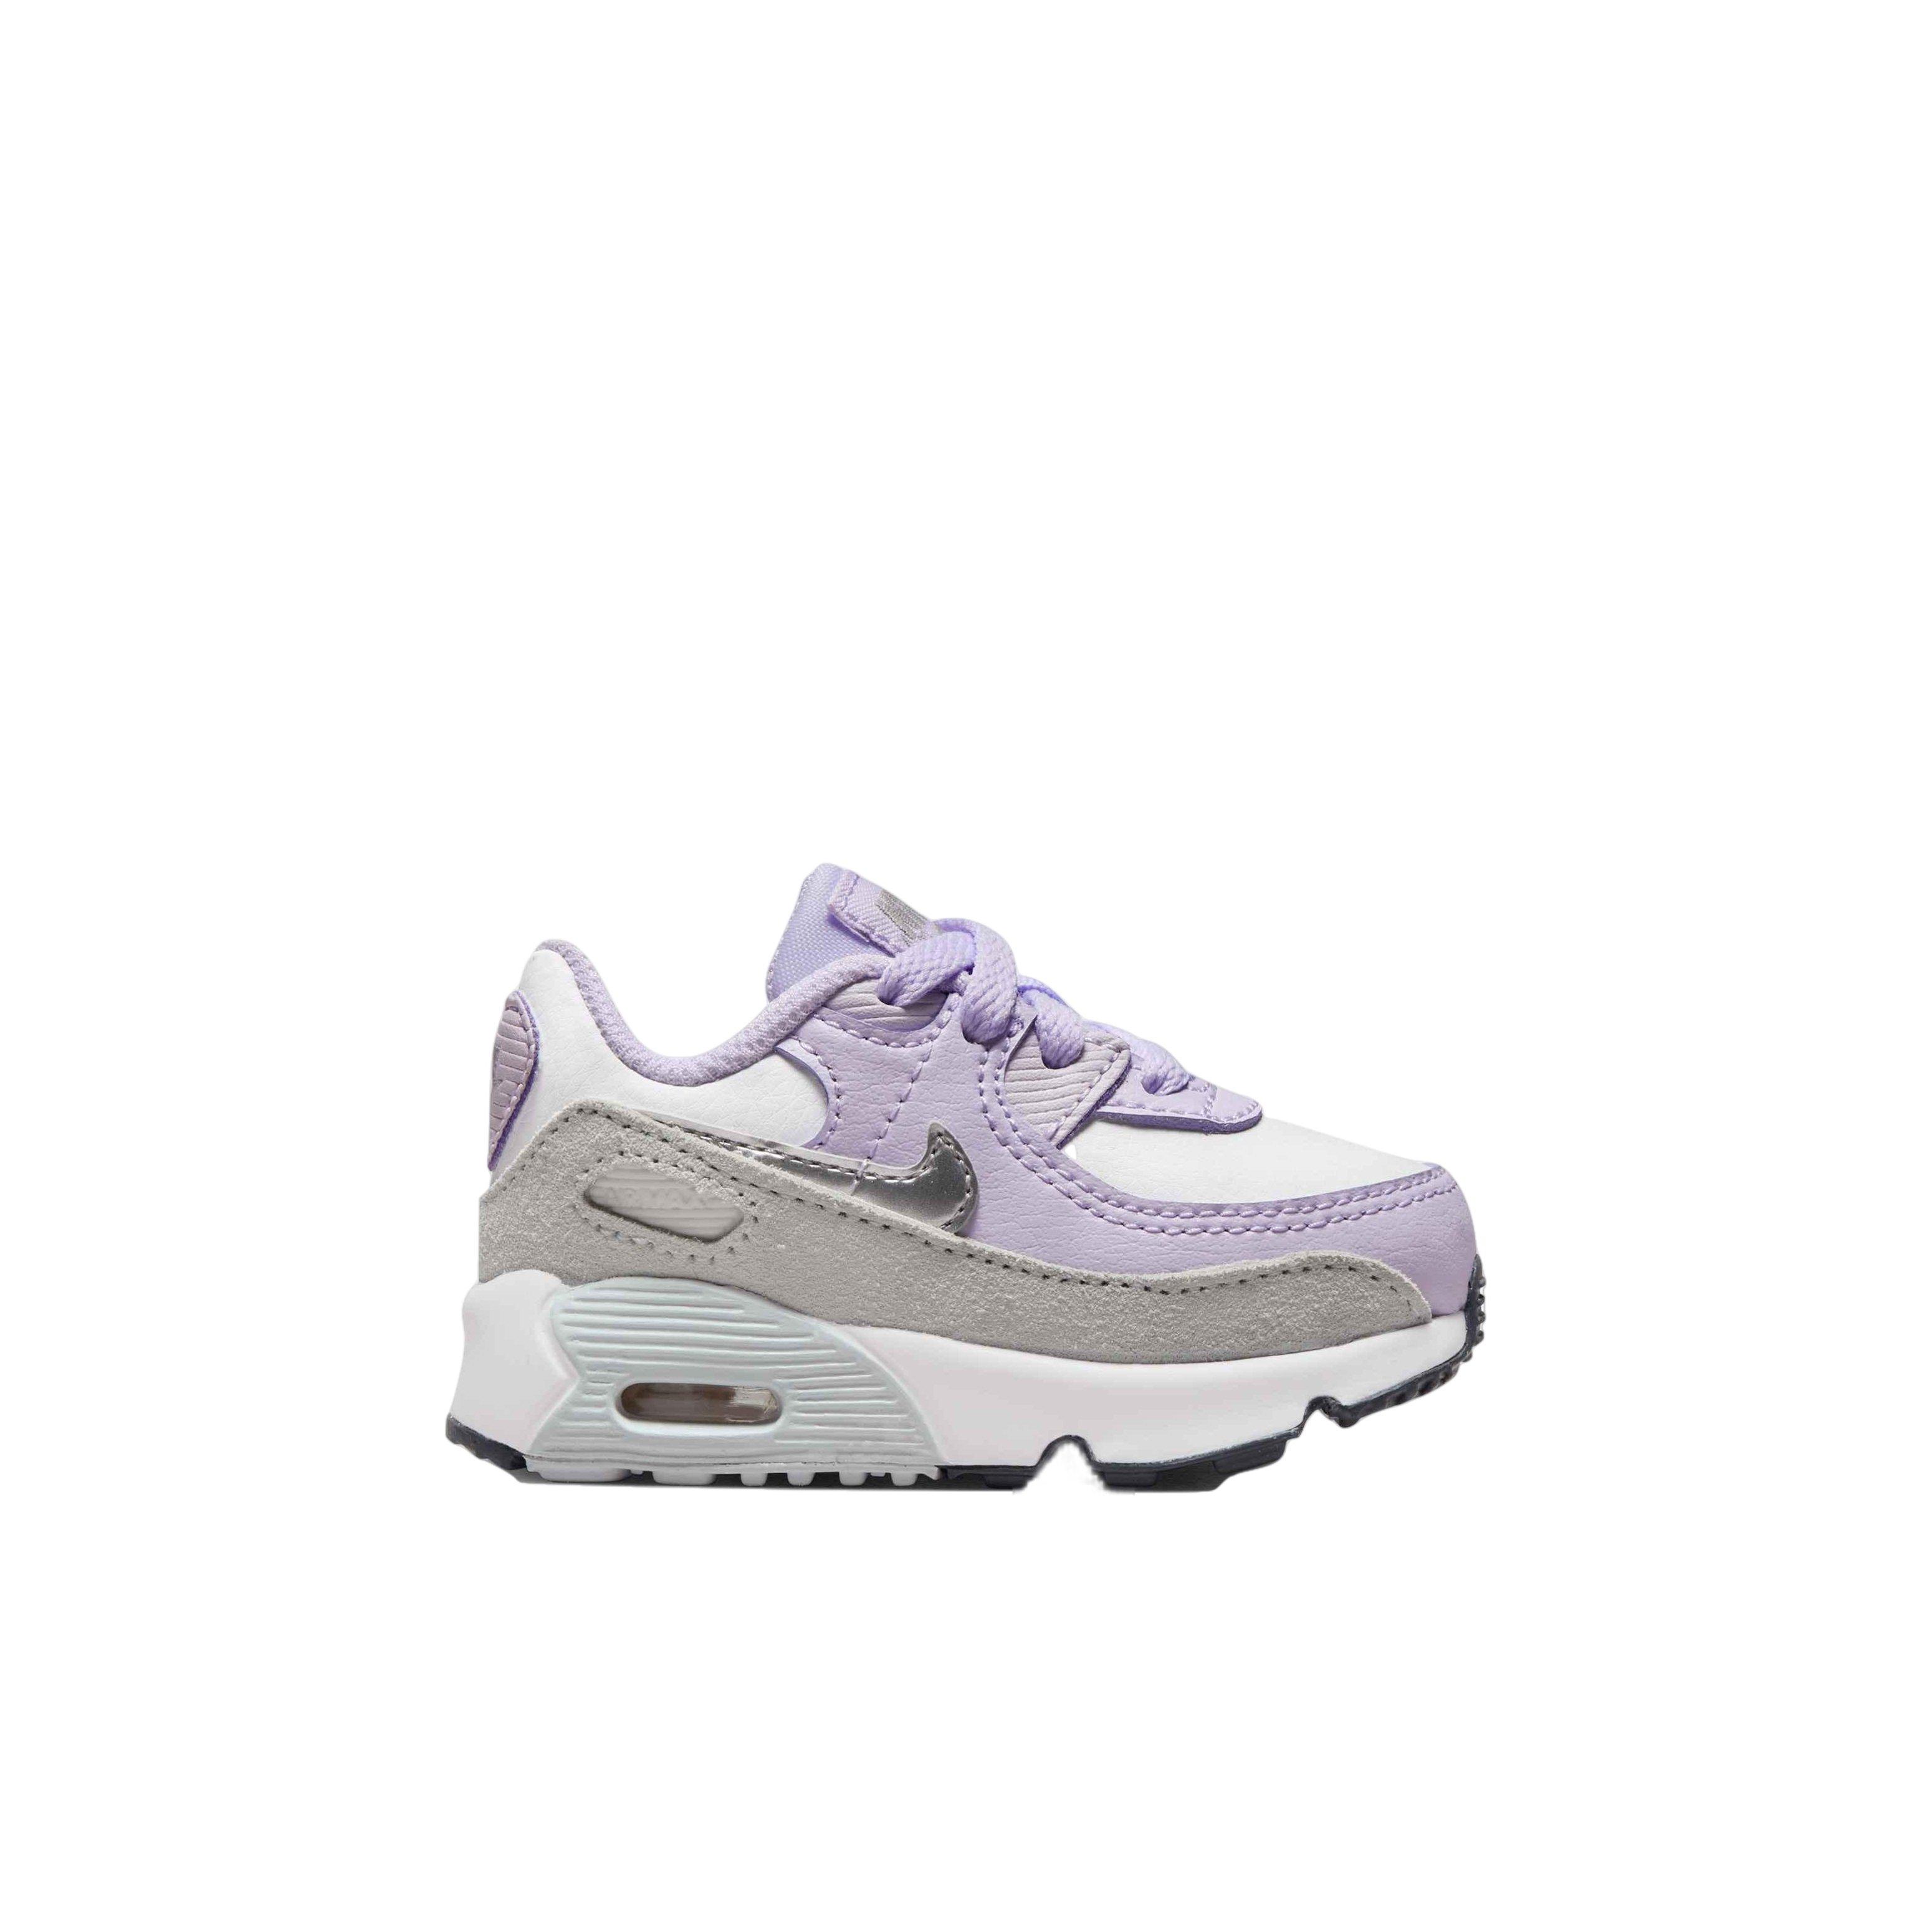 erfgoed Woedend Bruin Nike Air Max 90 LTR "White/Metallic Silver/Violet Frost" Infant Girls' Shoe